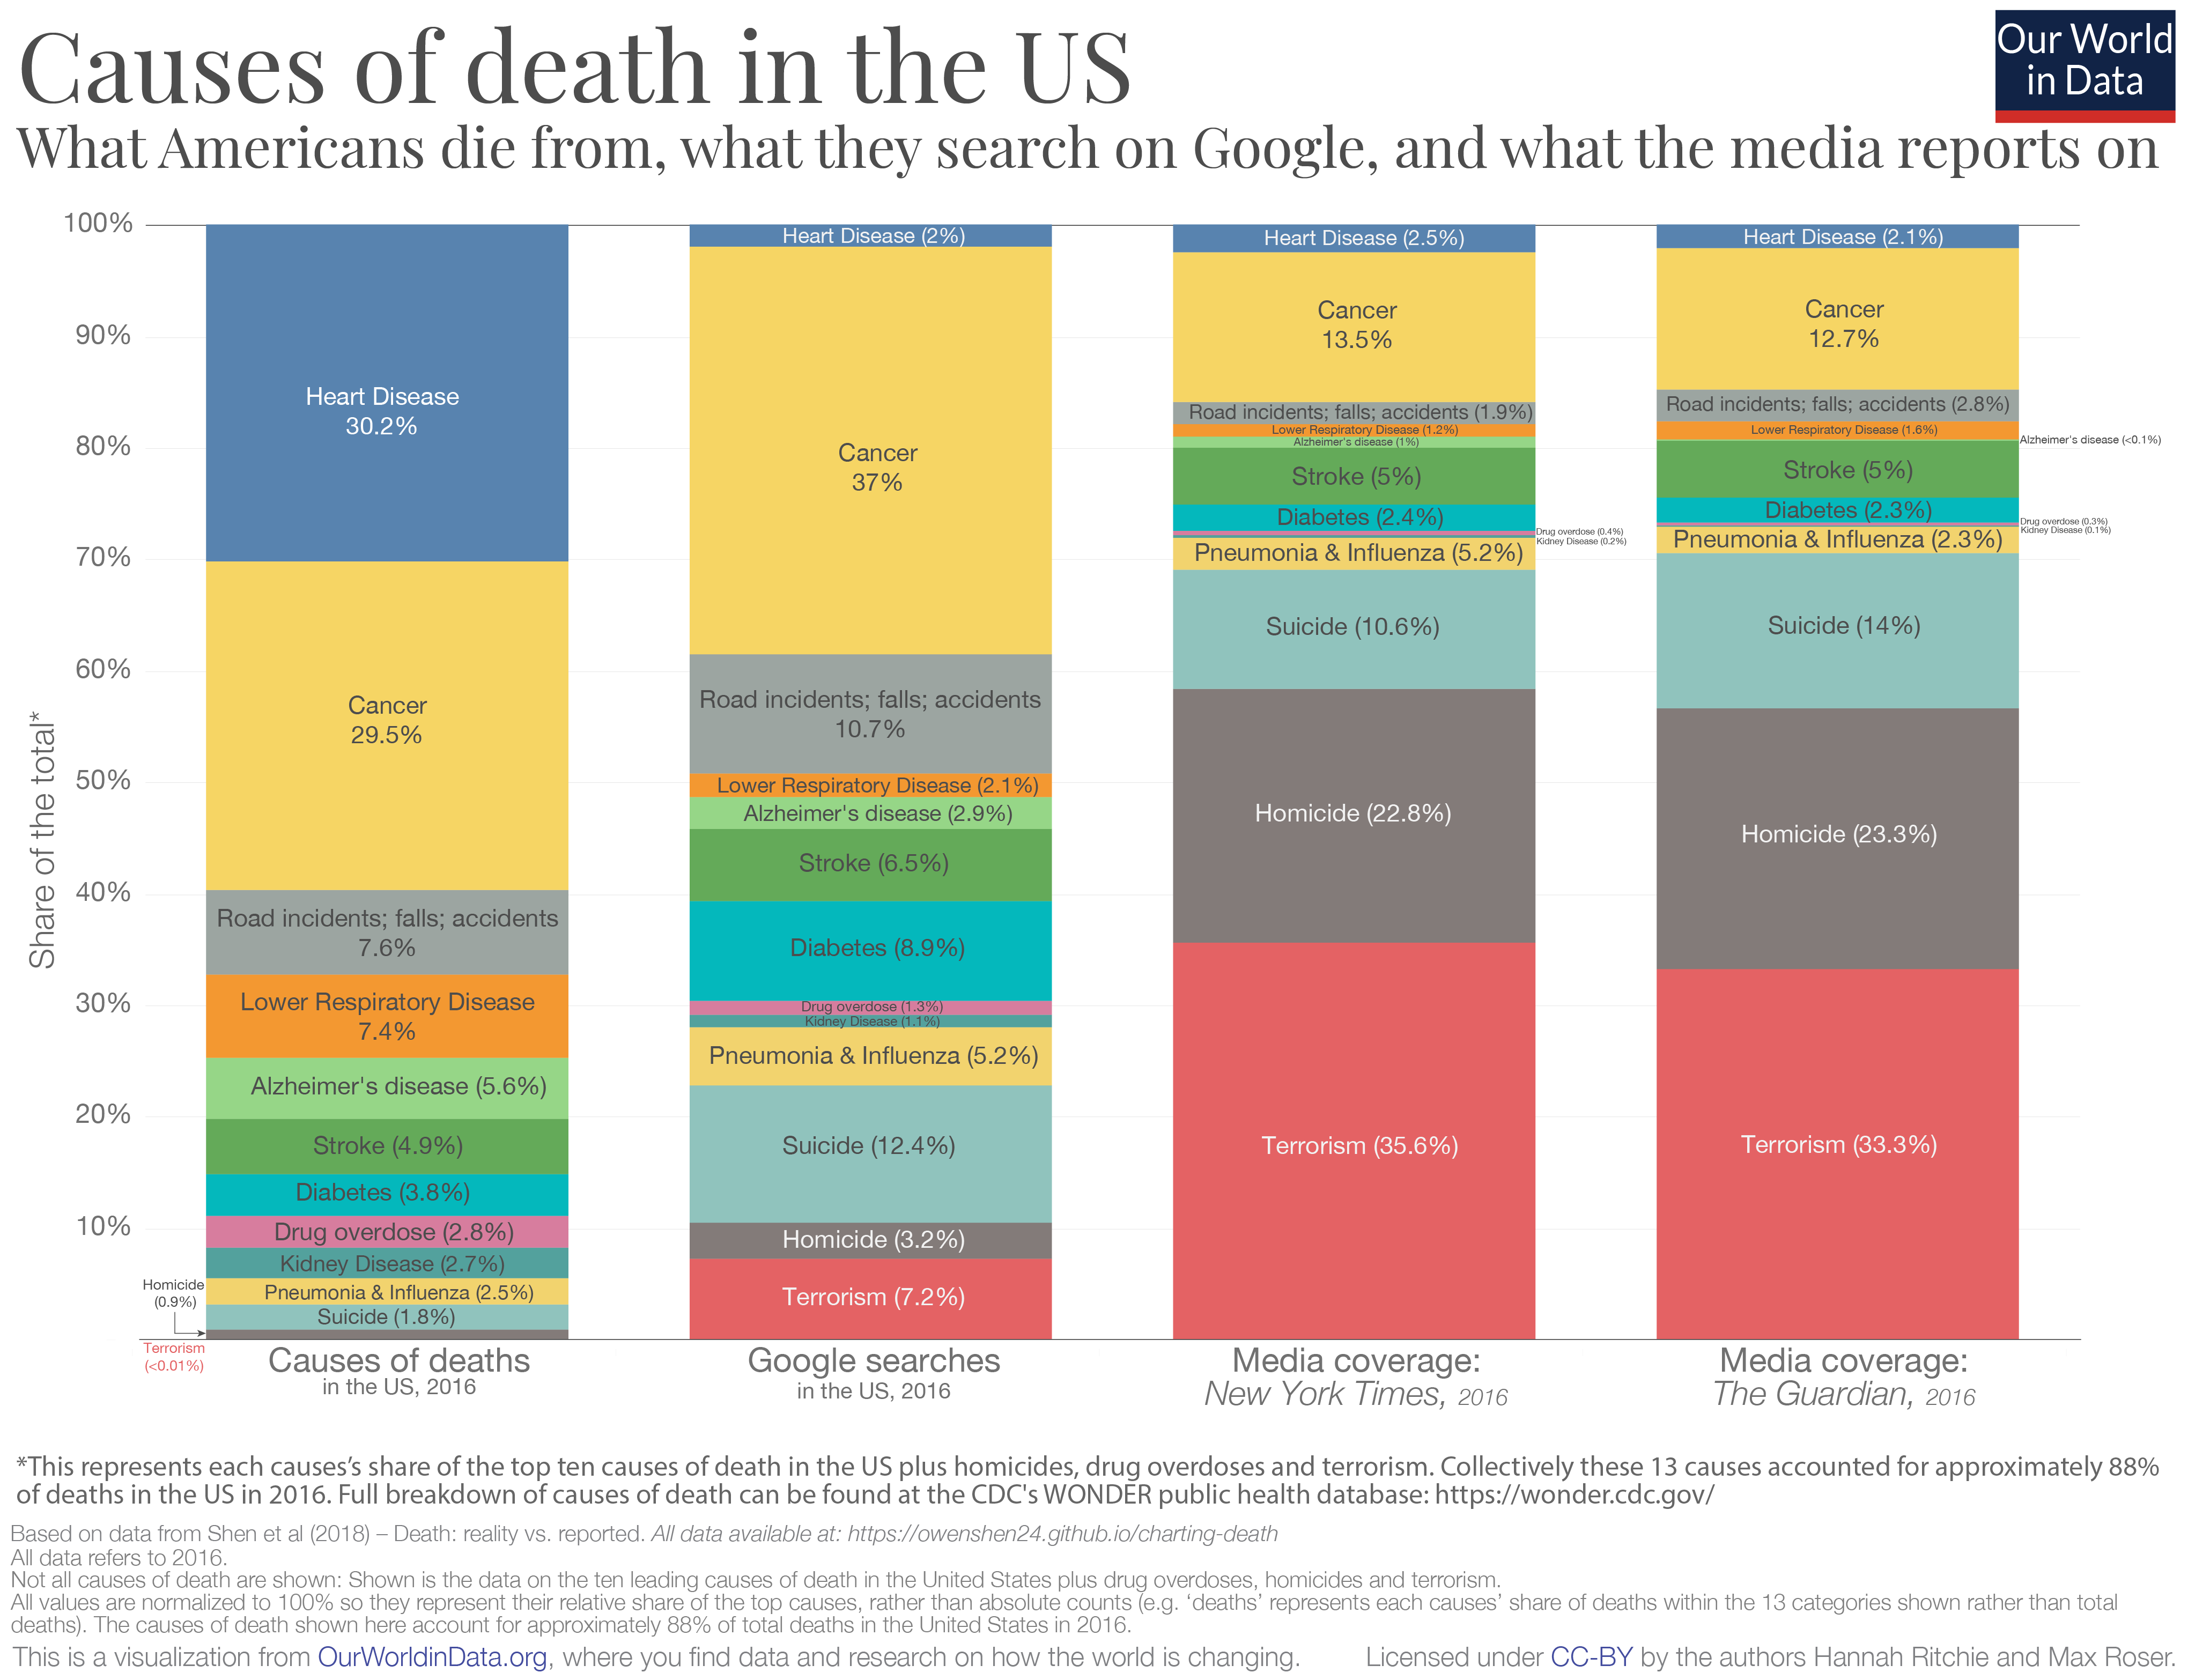 Causes-of-death-in-USA-vs.-media-coverage.png